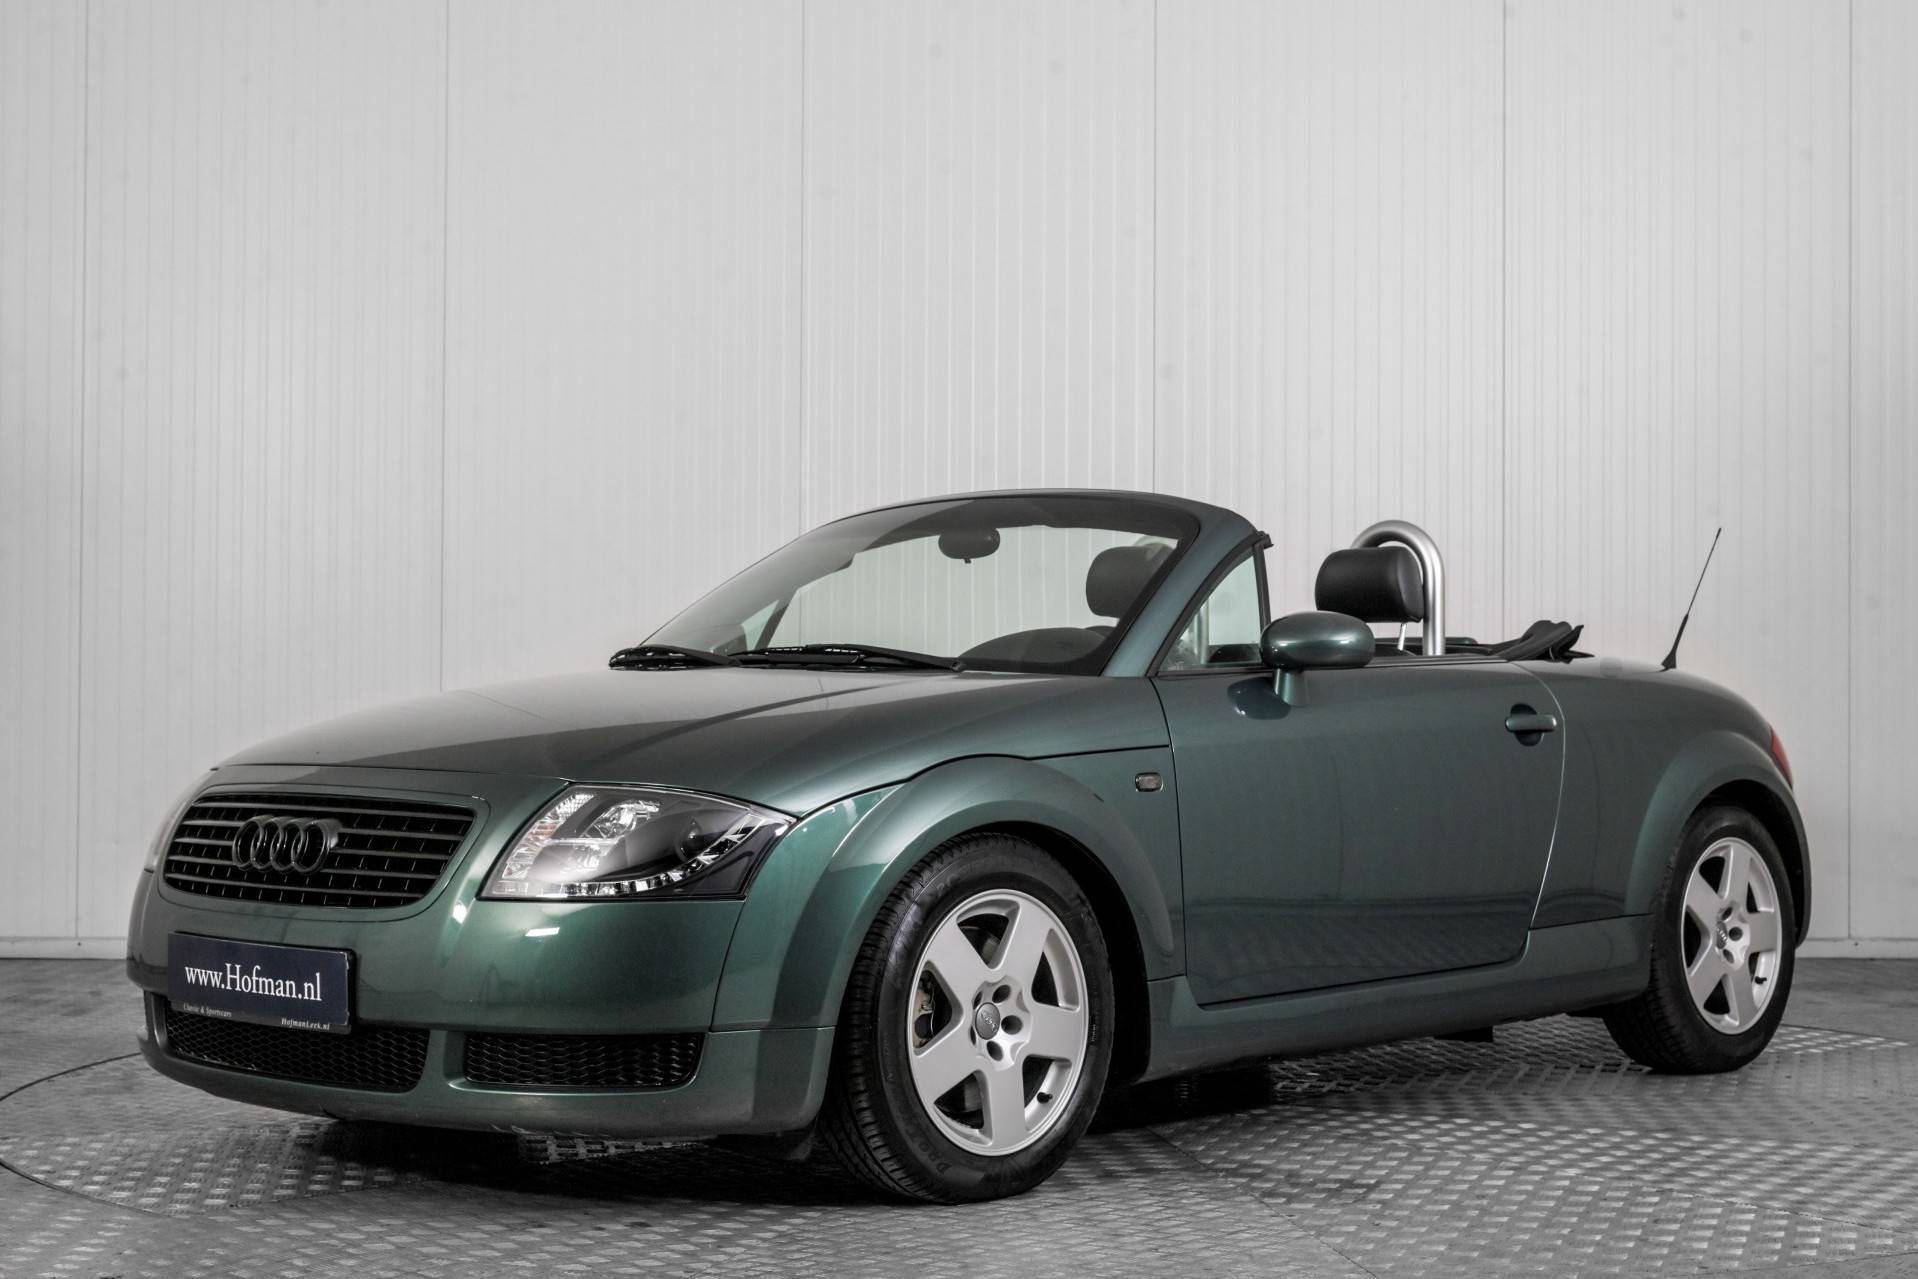 For Sale: Audi TT 1.8 T (2001) offered for GBP 6,580